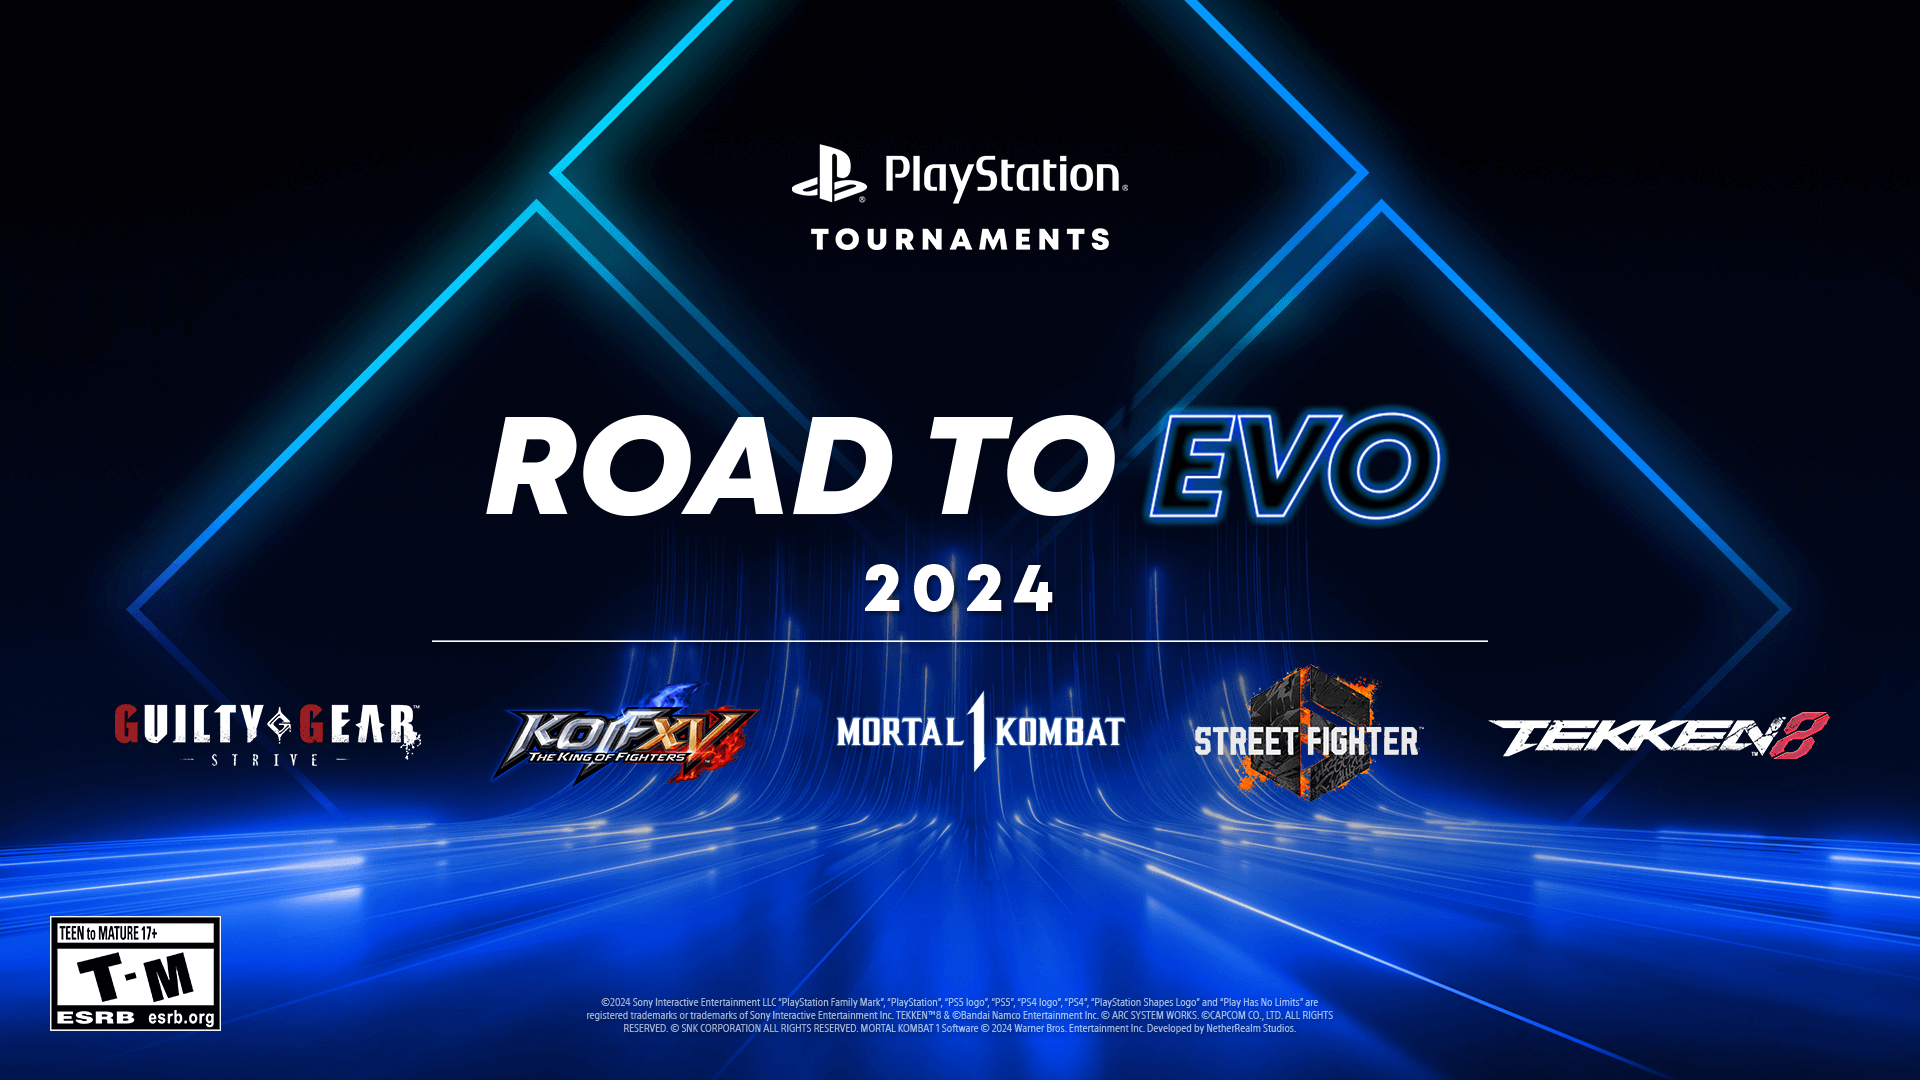 Evo Unveils "Road to Evo" 2024 Circuit For a Paid Travel to Evo 2024